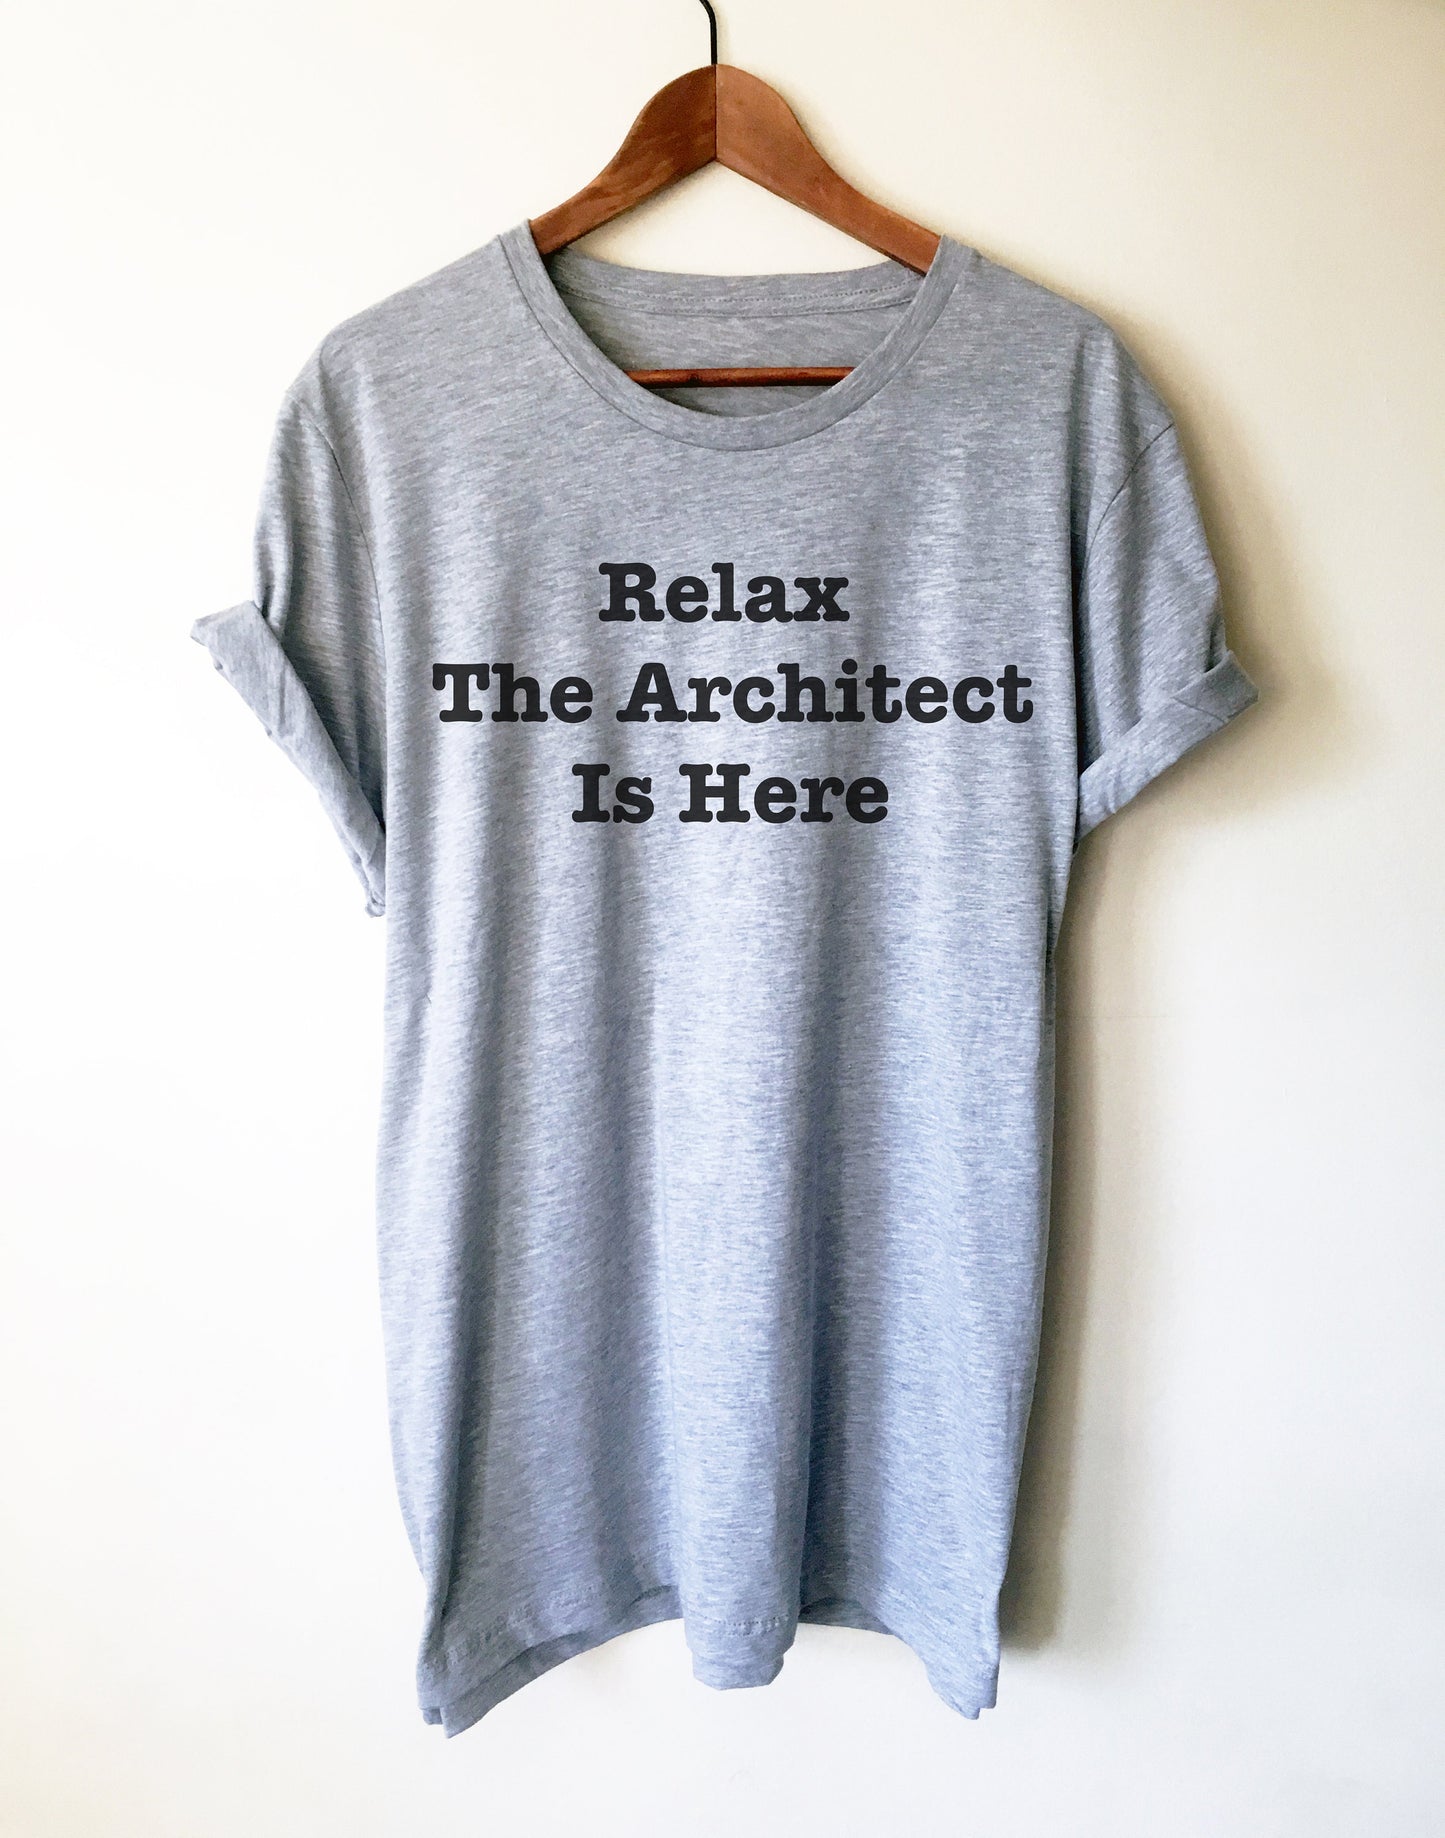 Relax The Architect Is Here Unisex Shirt - Architect Shirt, Gift For Architect, Architecture, Architect Gift, Architecture Gifts